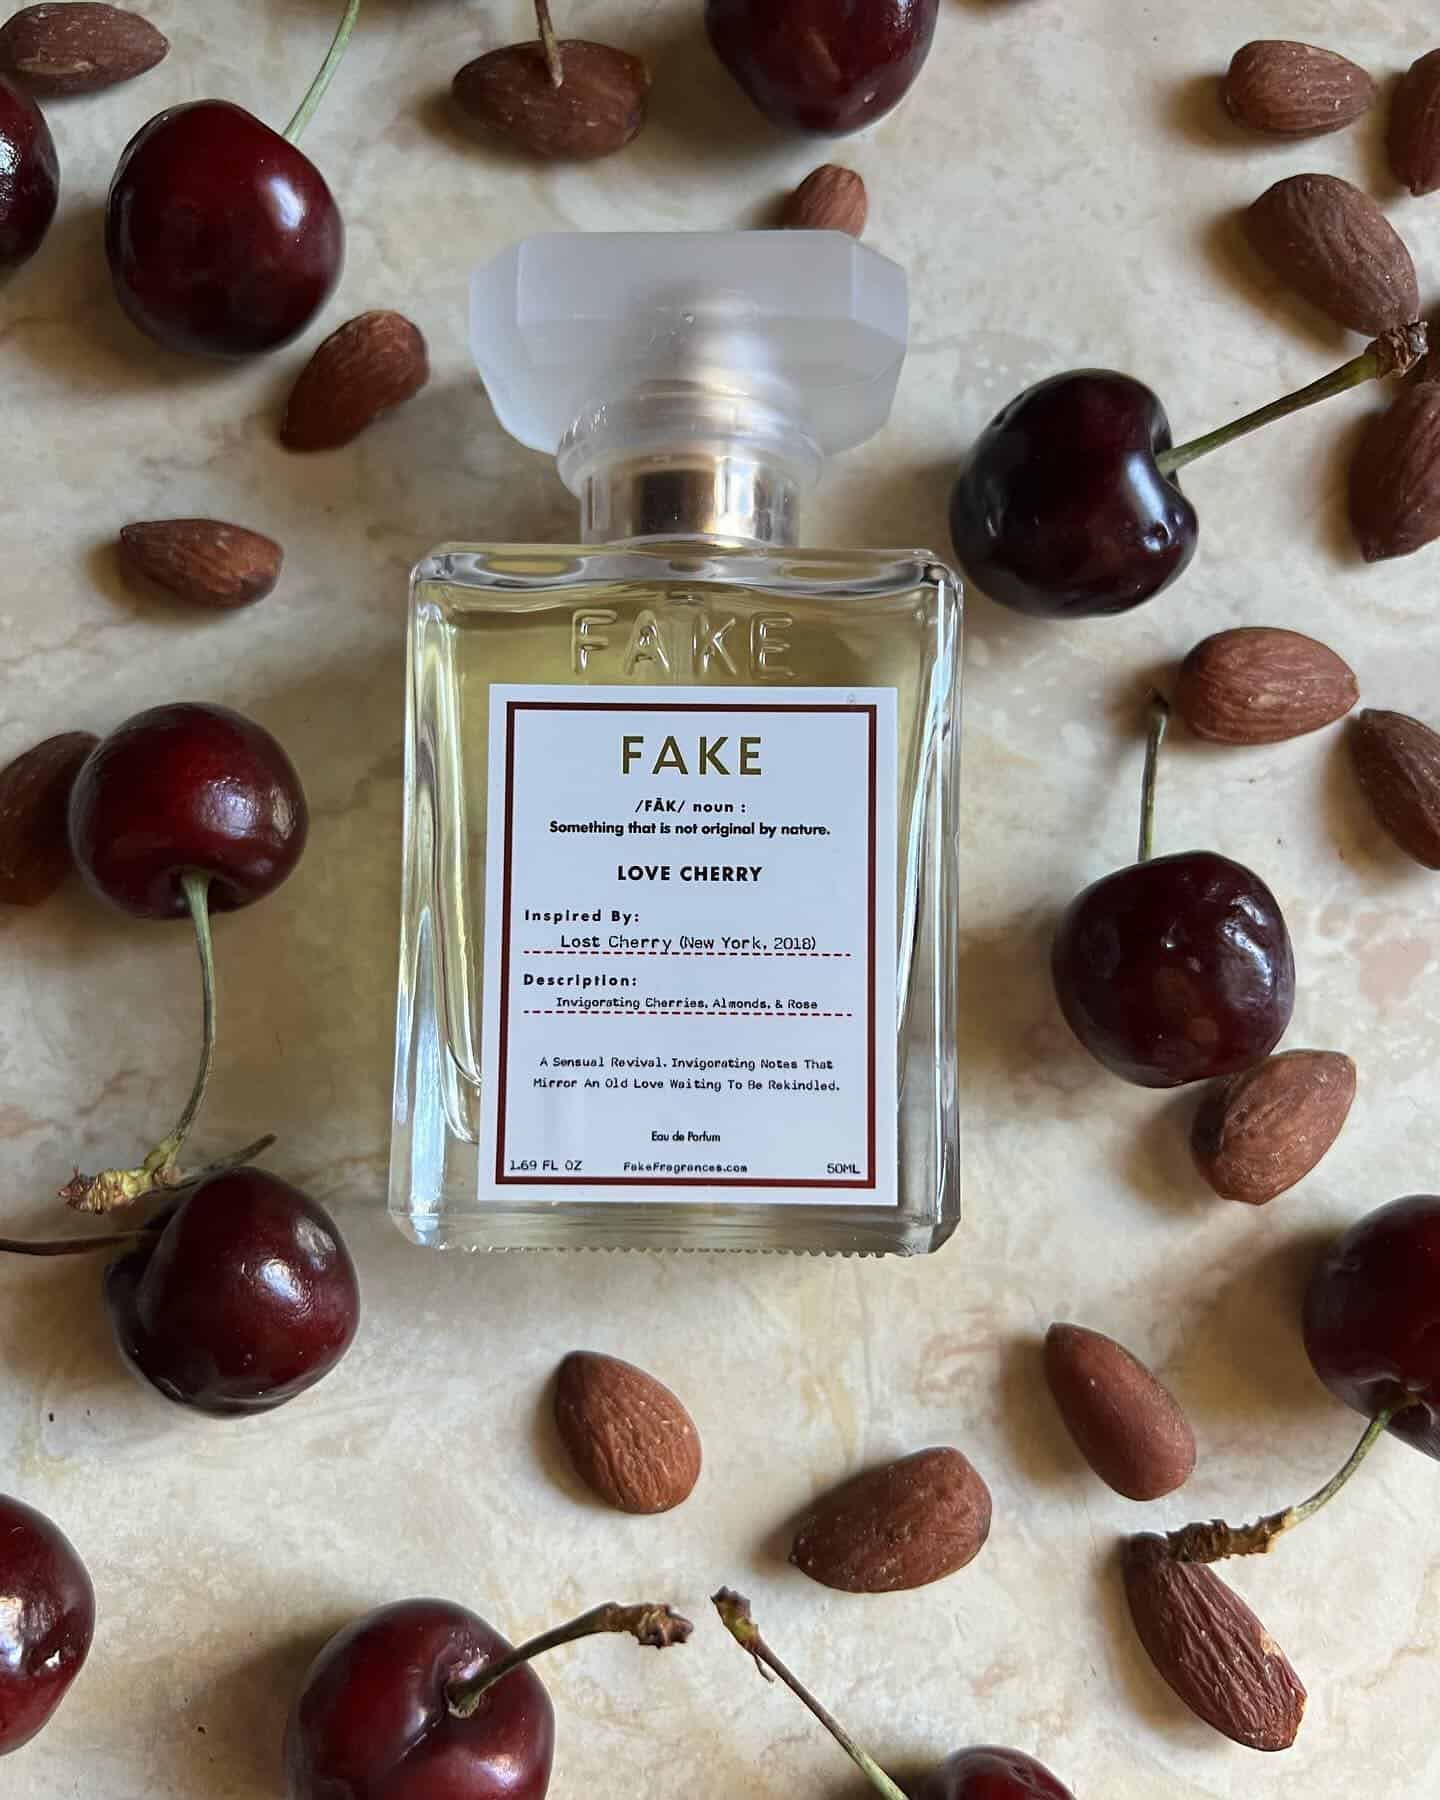 a bottle of love cherry parfum by fake surrounded by cherries and almonds